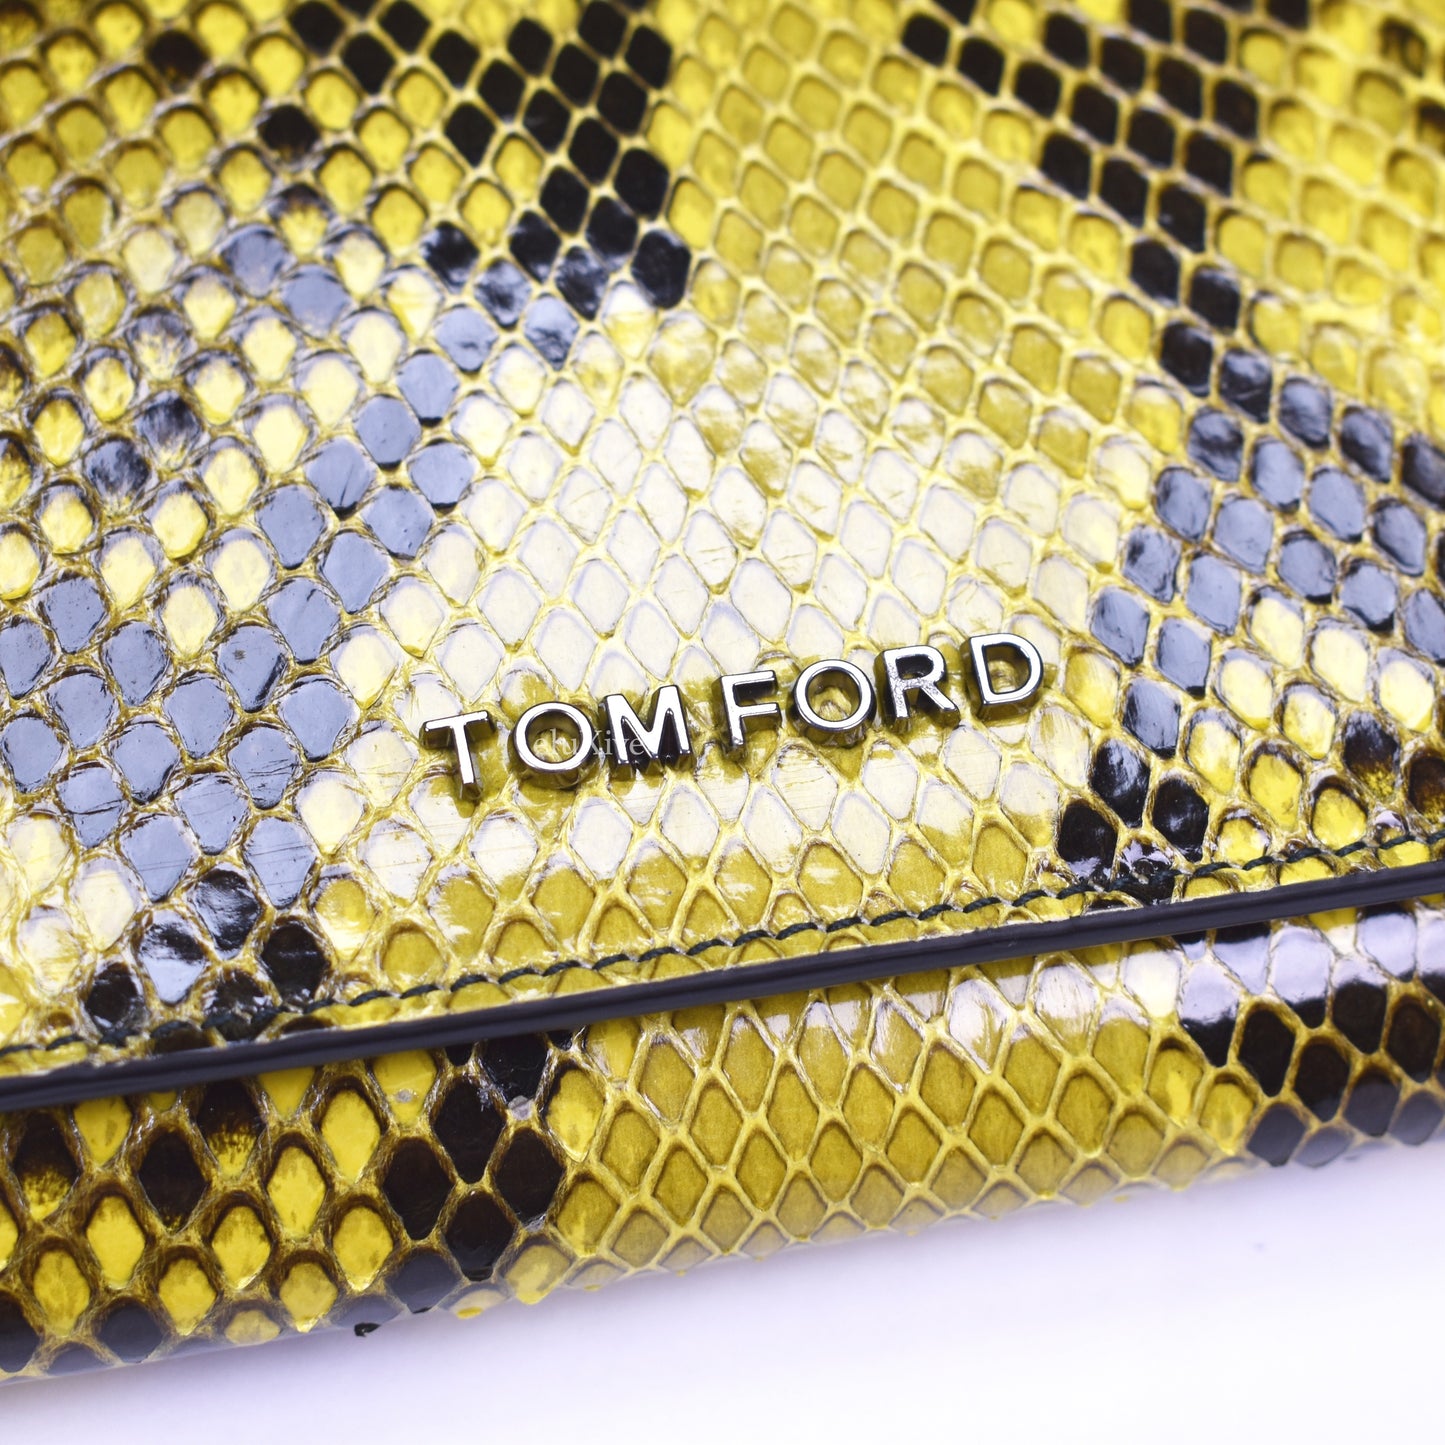 Tom Ford - Yellow Exotic Python Long Wallet